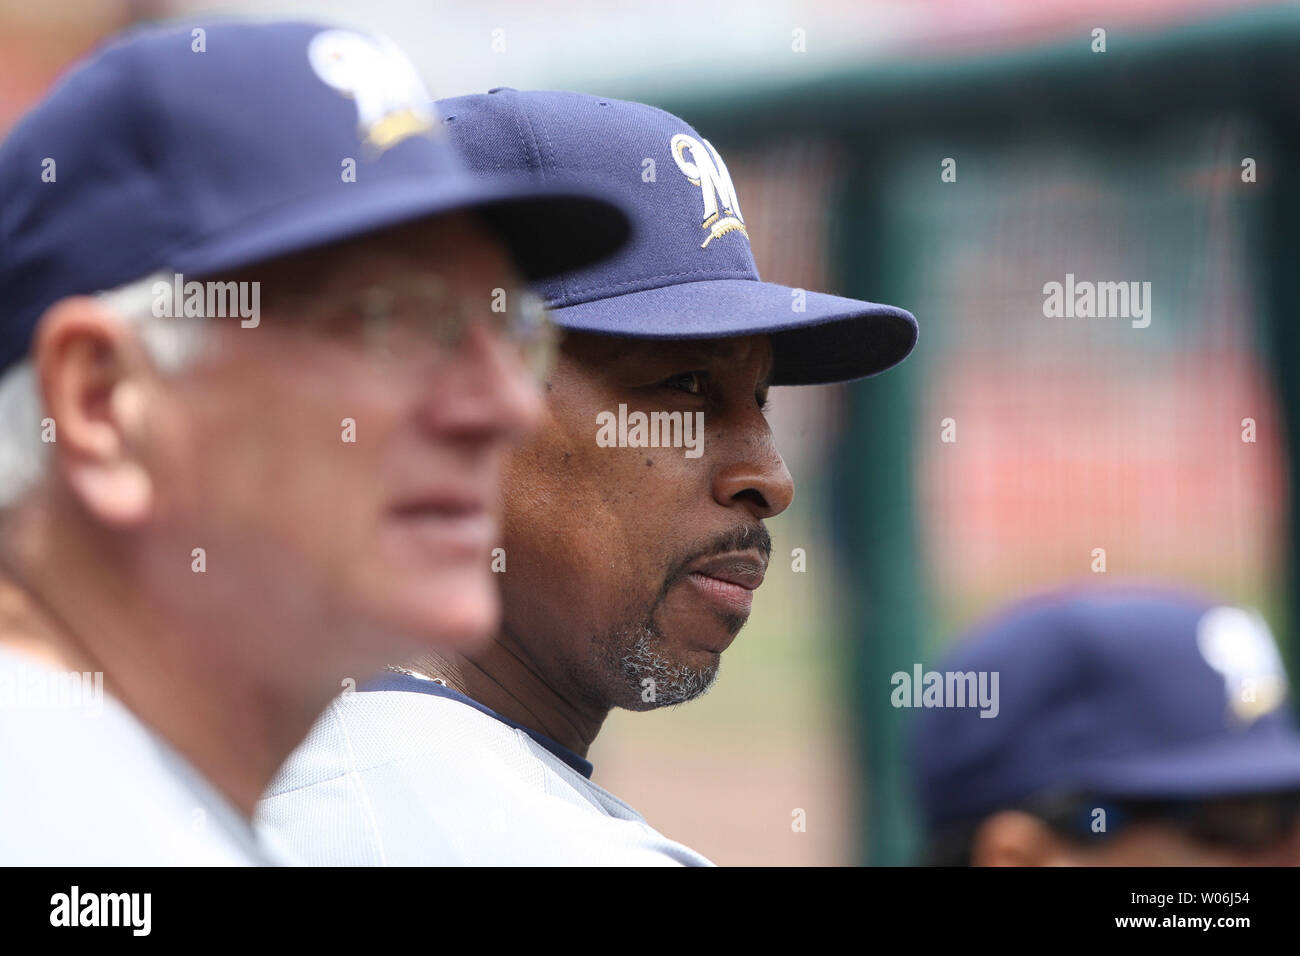 Milwaukee Brewers coach Willie Randolph (R) watches the action with manager Ken Macha from the dugout against the St. Louis Cardinals at Busch Stadium in St. Louis on May 16, 2009.  Milwaukee won the game 1-0.   (UPI Photo/Bill Greenblatt) Stock Photo